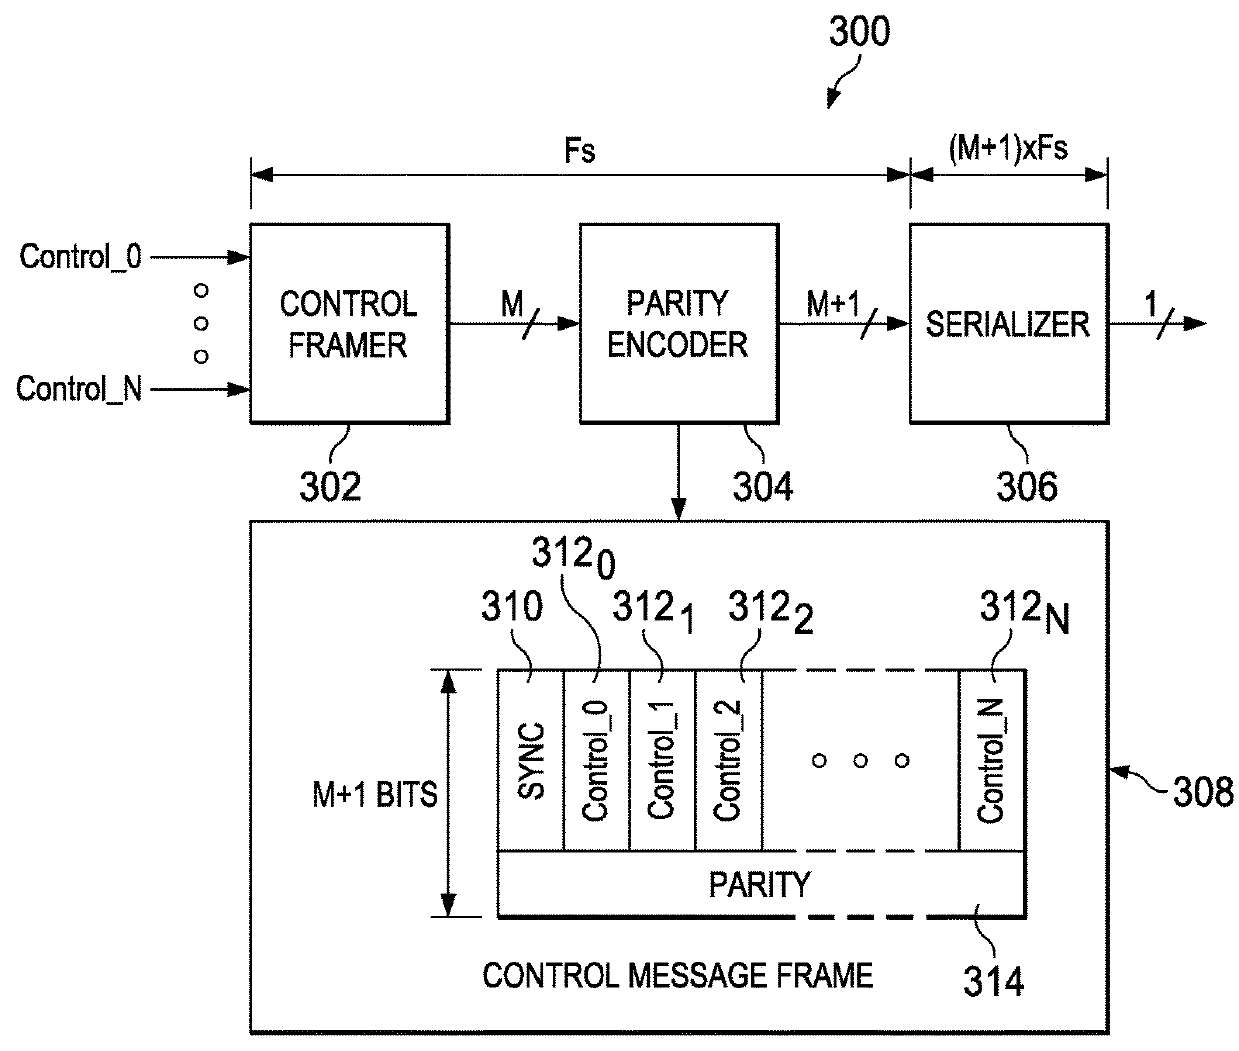 Systems and methods for RRU control messaging architecture for massive MIMO systems